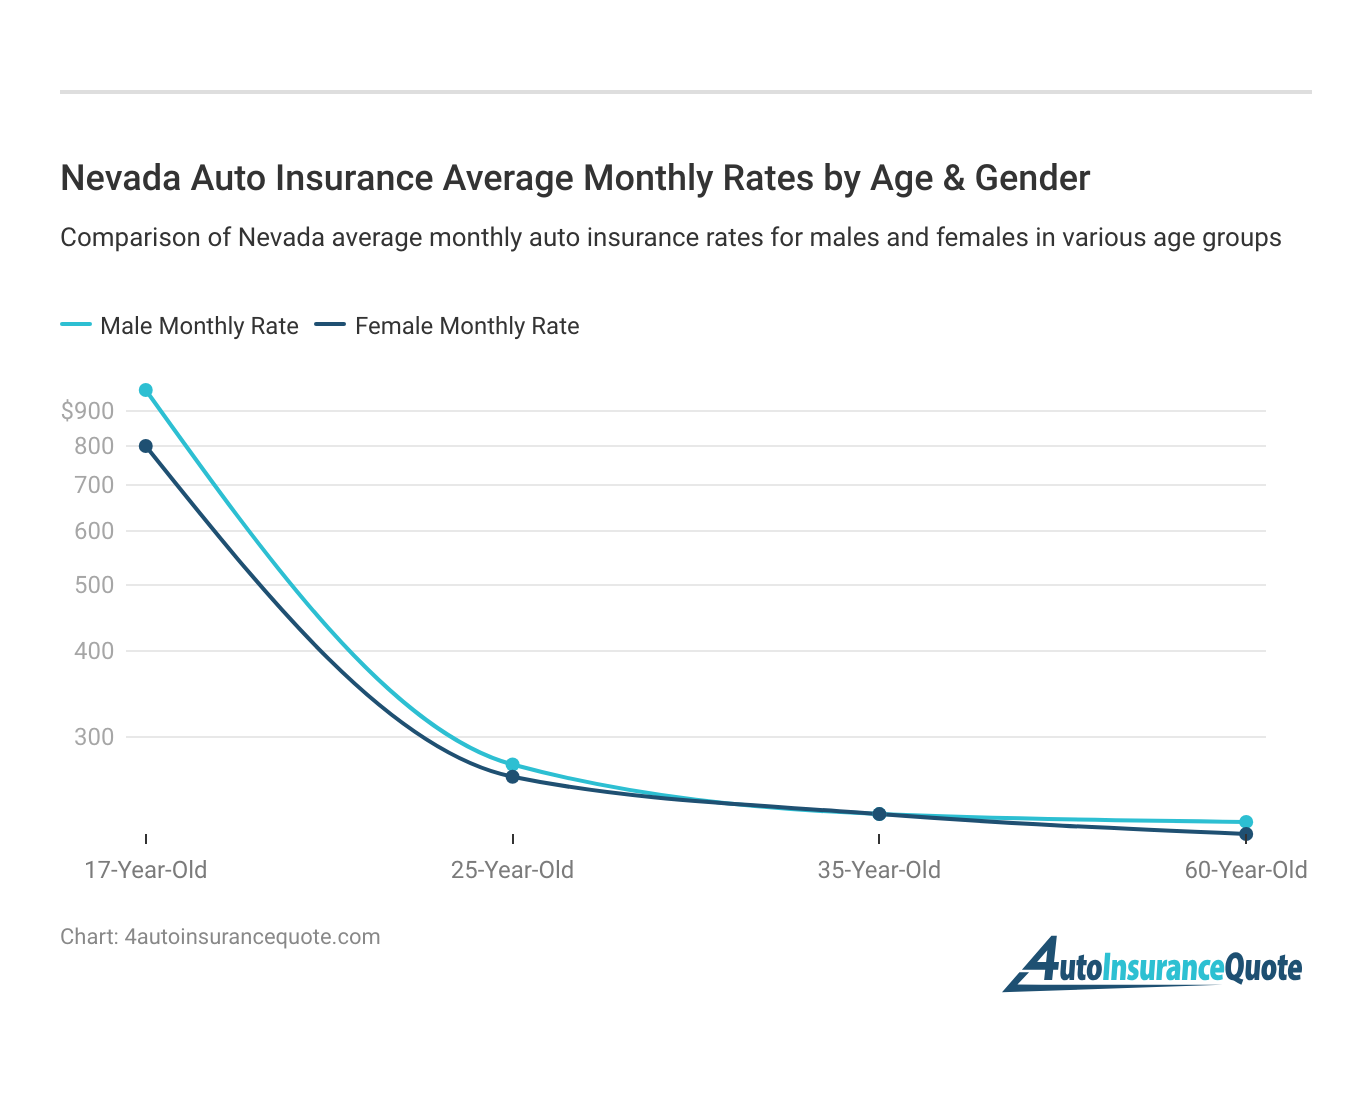 <h3>Nevada Auto Insurance Average Monthly Rates by Age & Gender</h3>